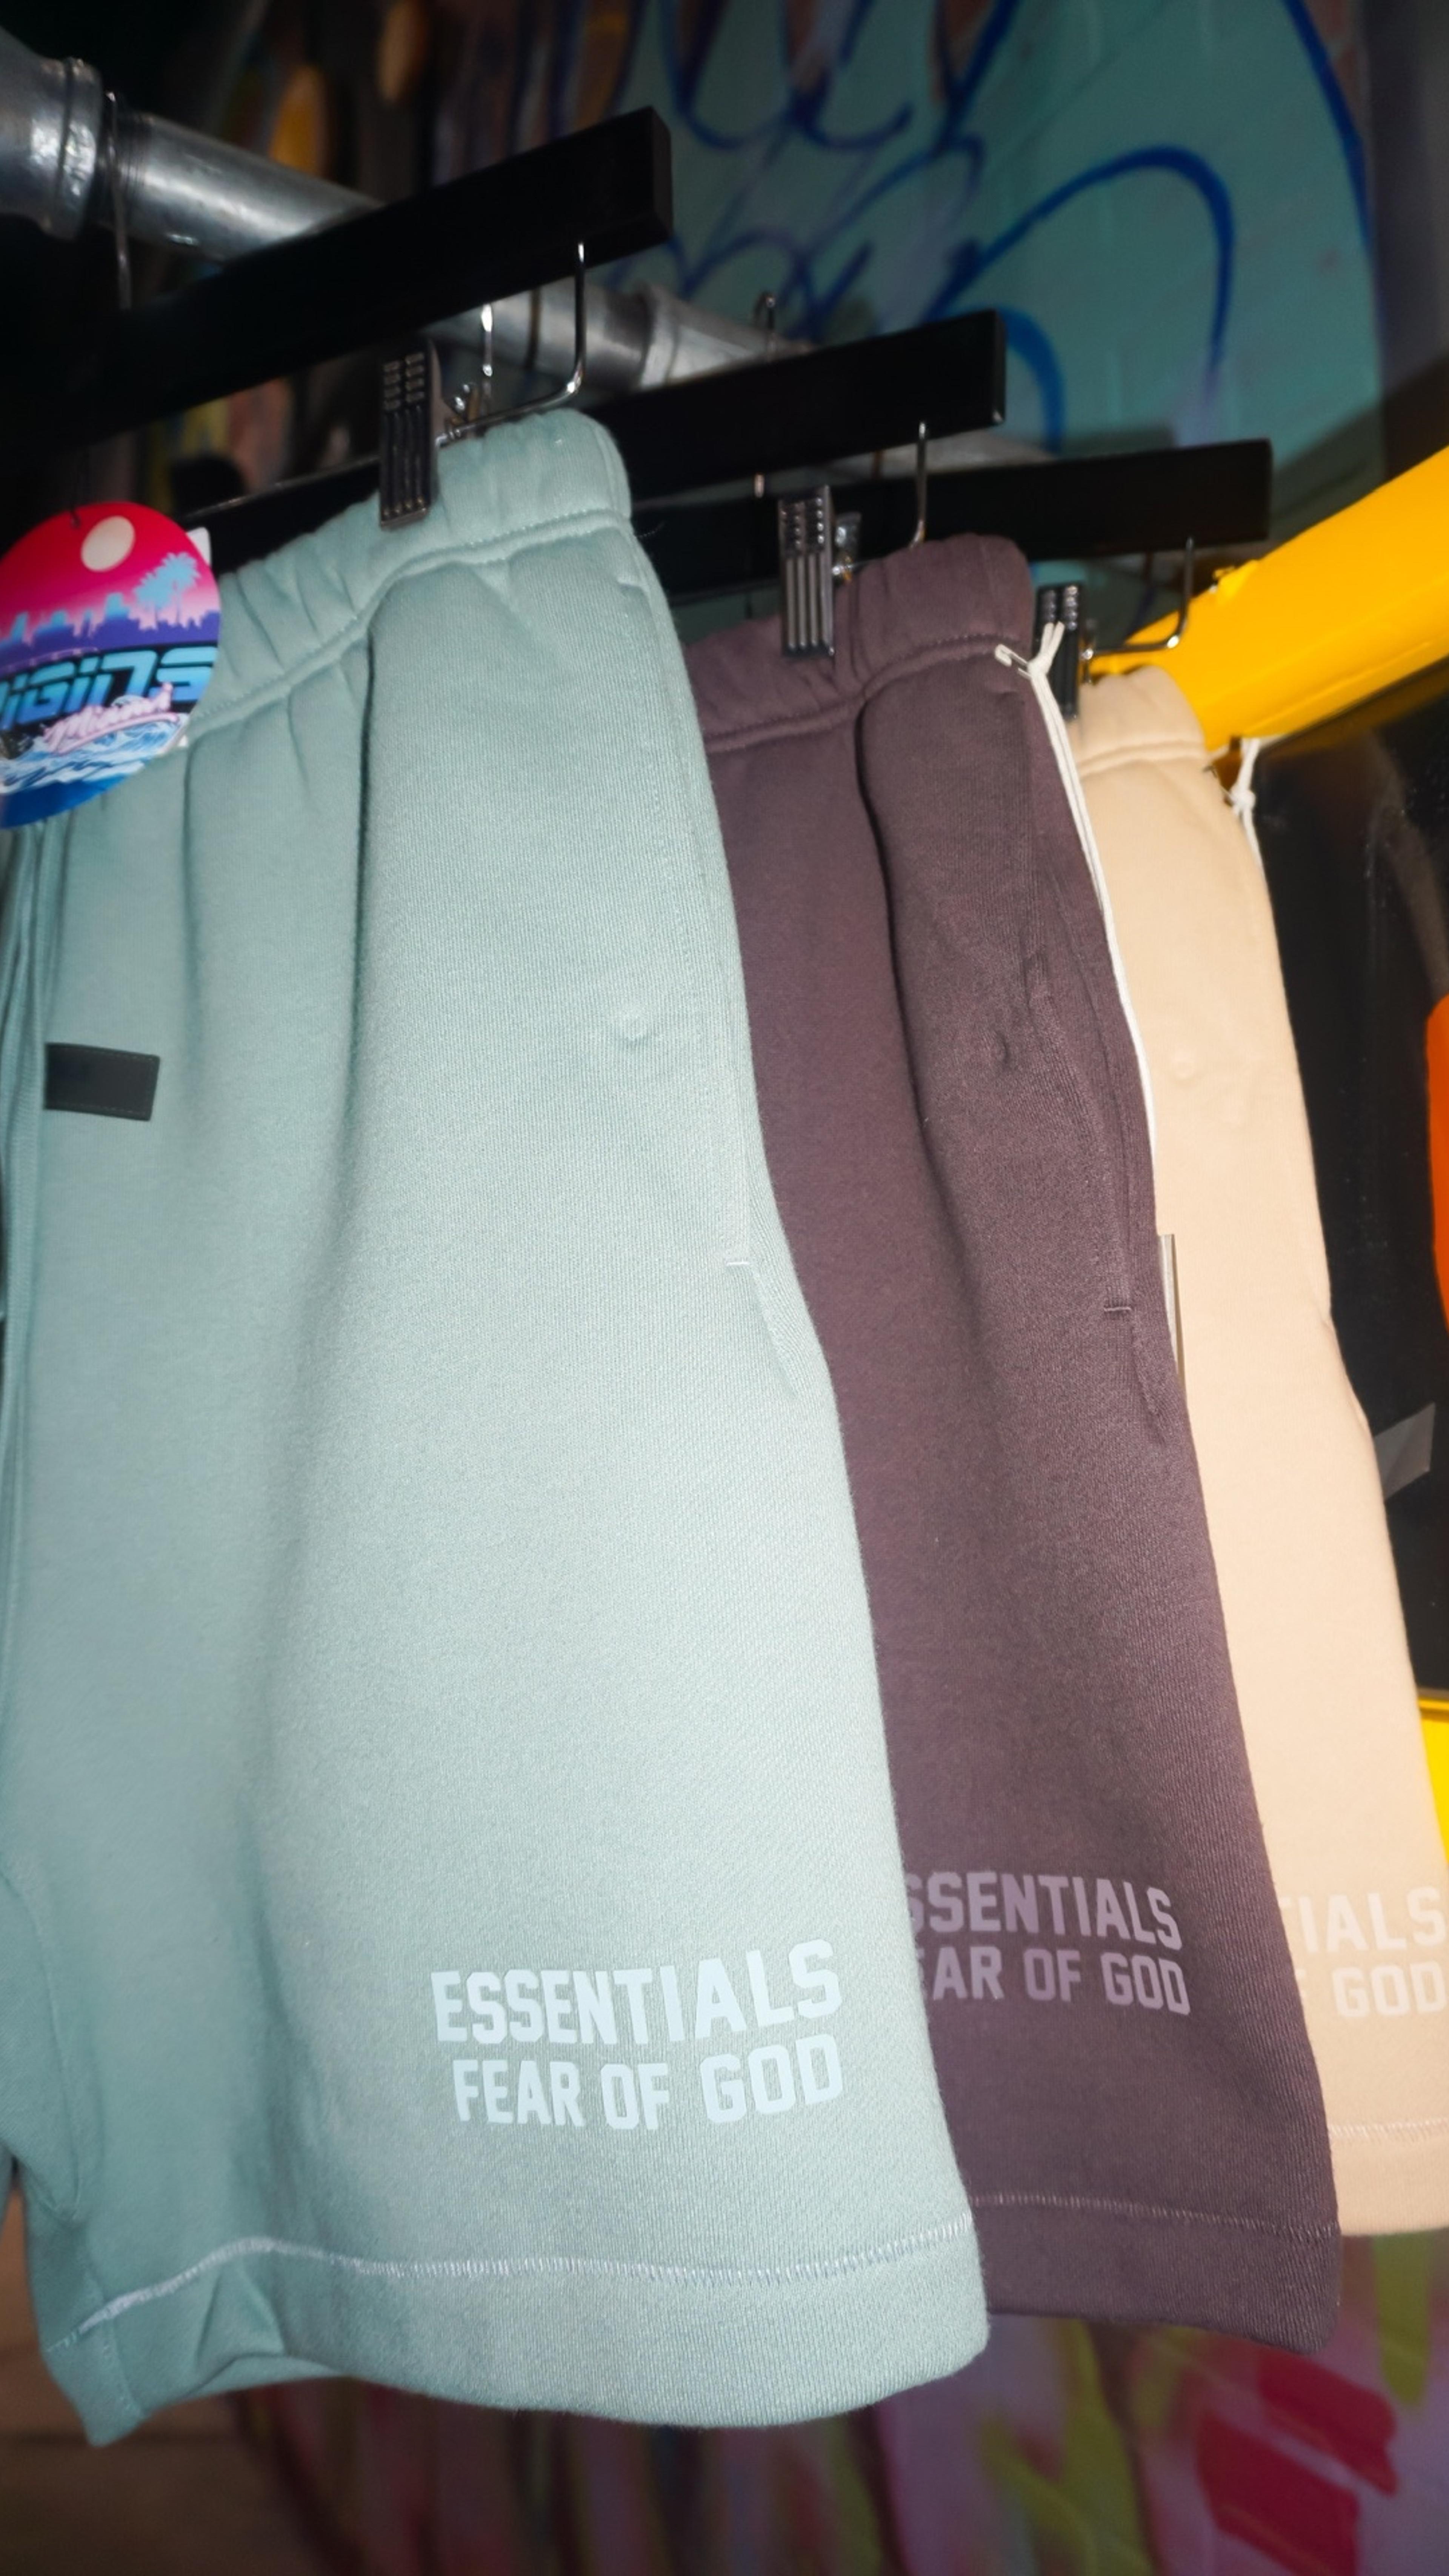 Preview image for the show titled "Essentials" at Today @ 5:45 PM